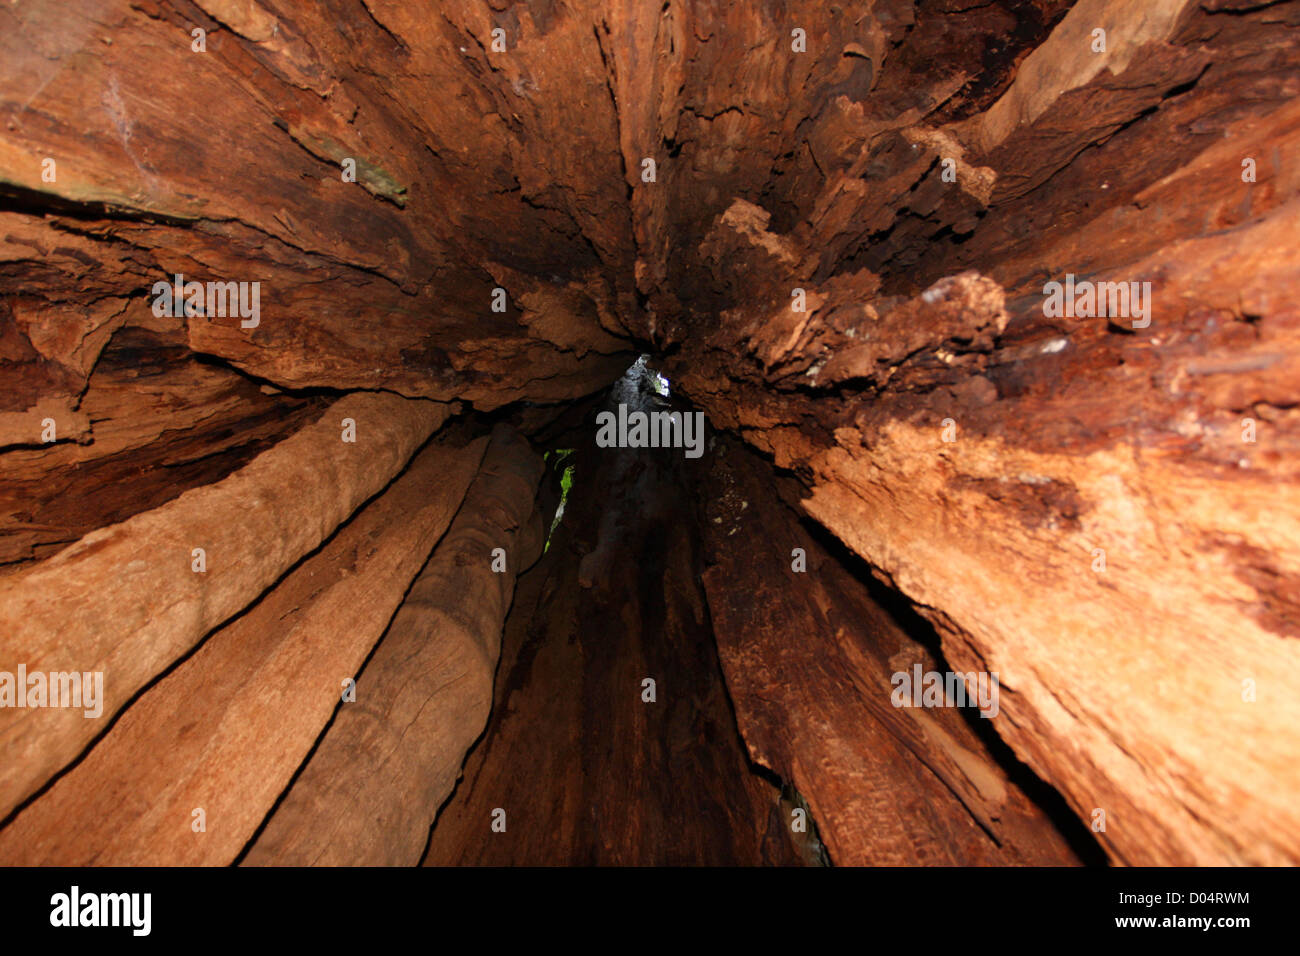 A view looking up inside the worlds largest Western Red Cedar (Thuja Plicata) tree in Jefferson County, Washington, USA in July Stock Photo